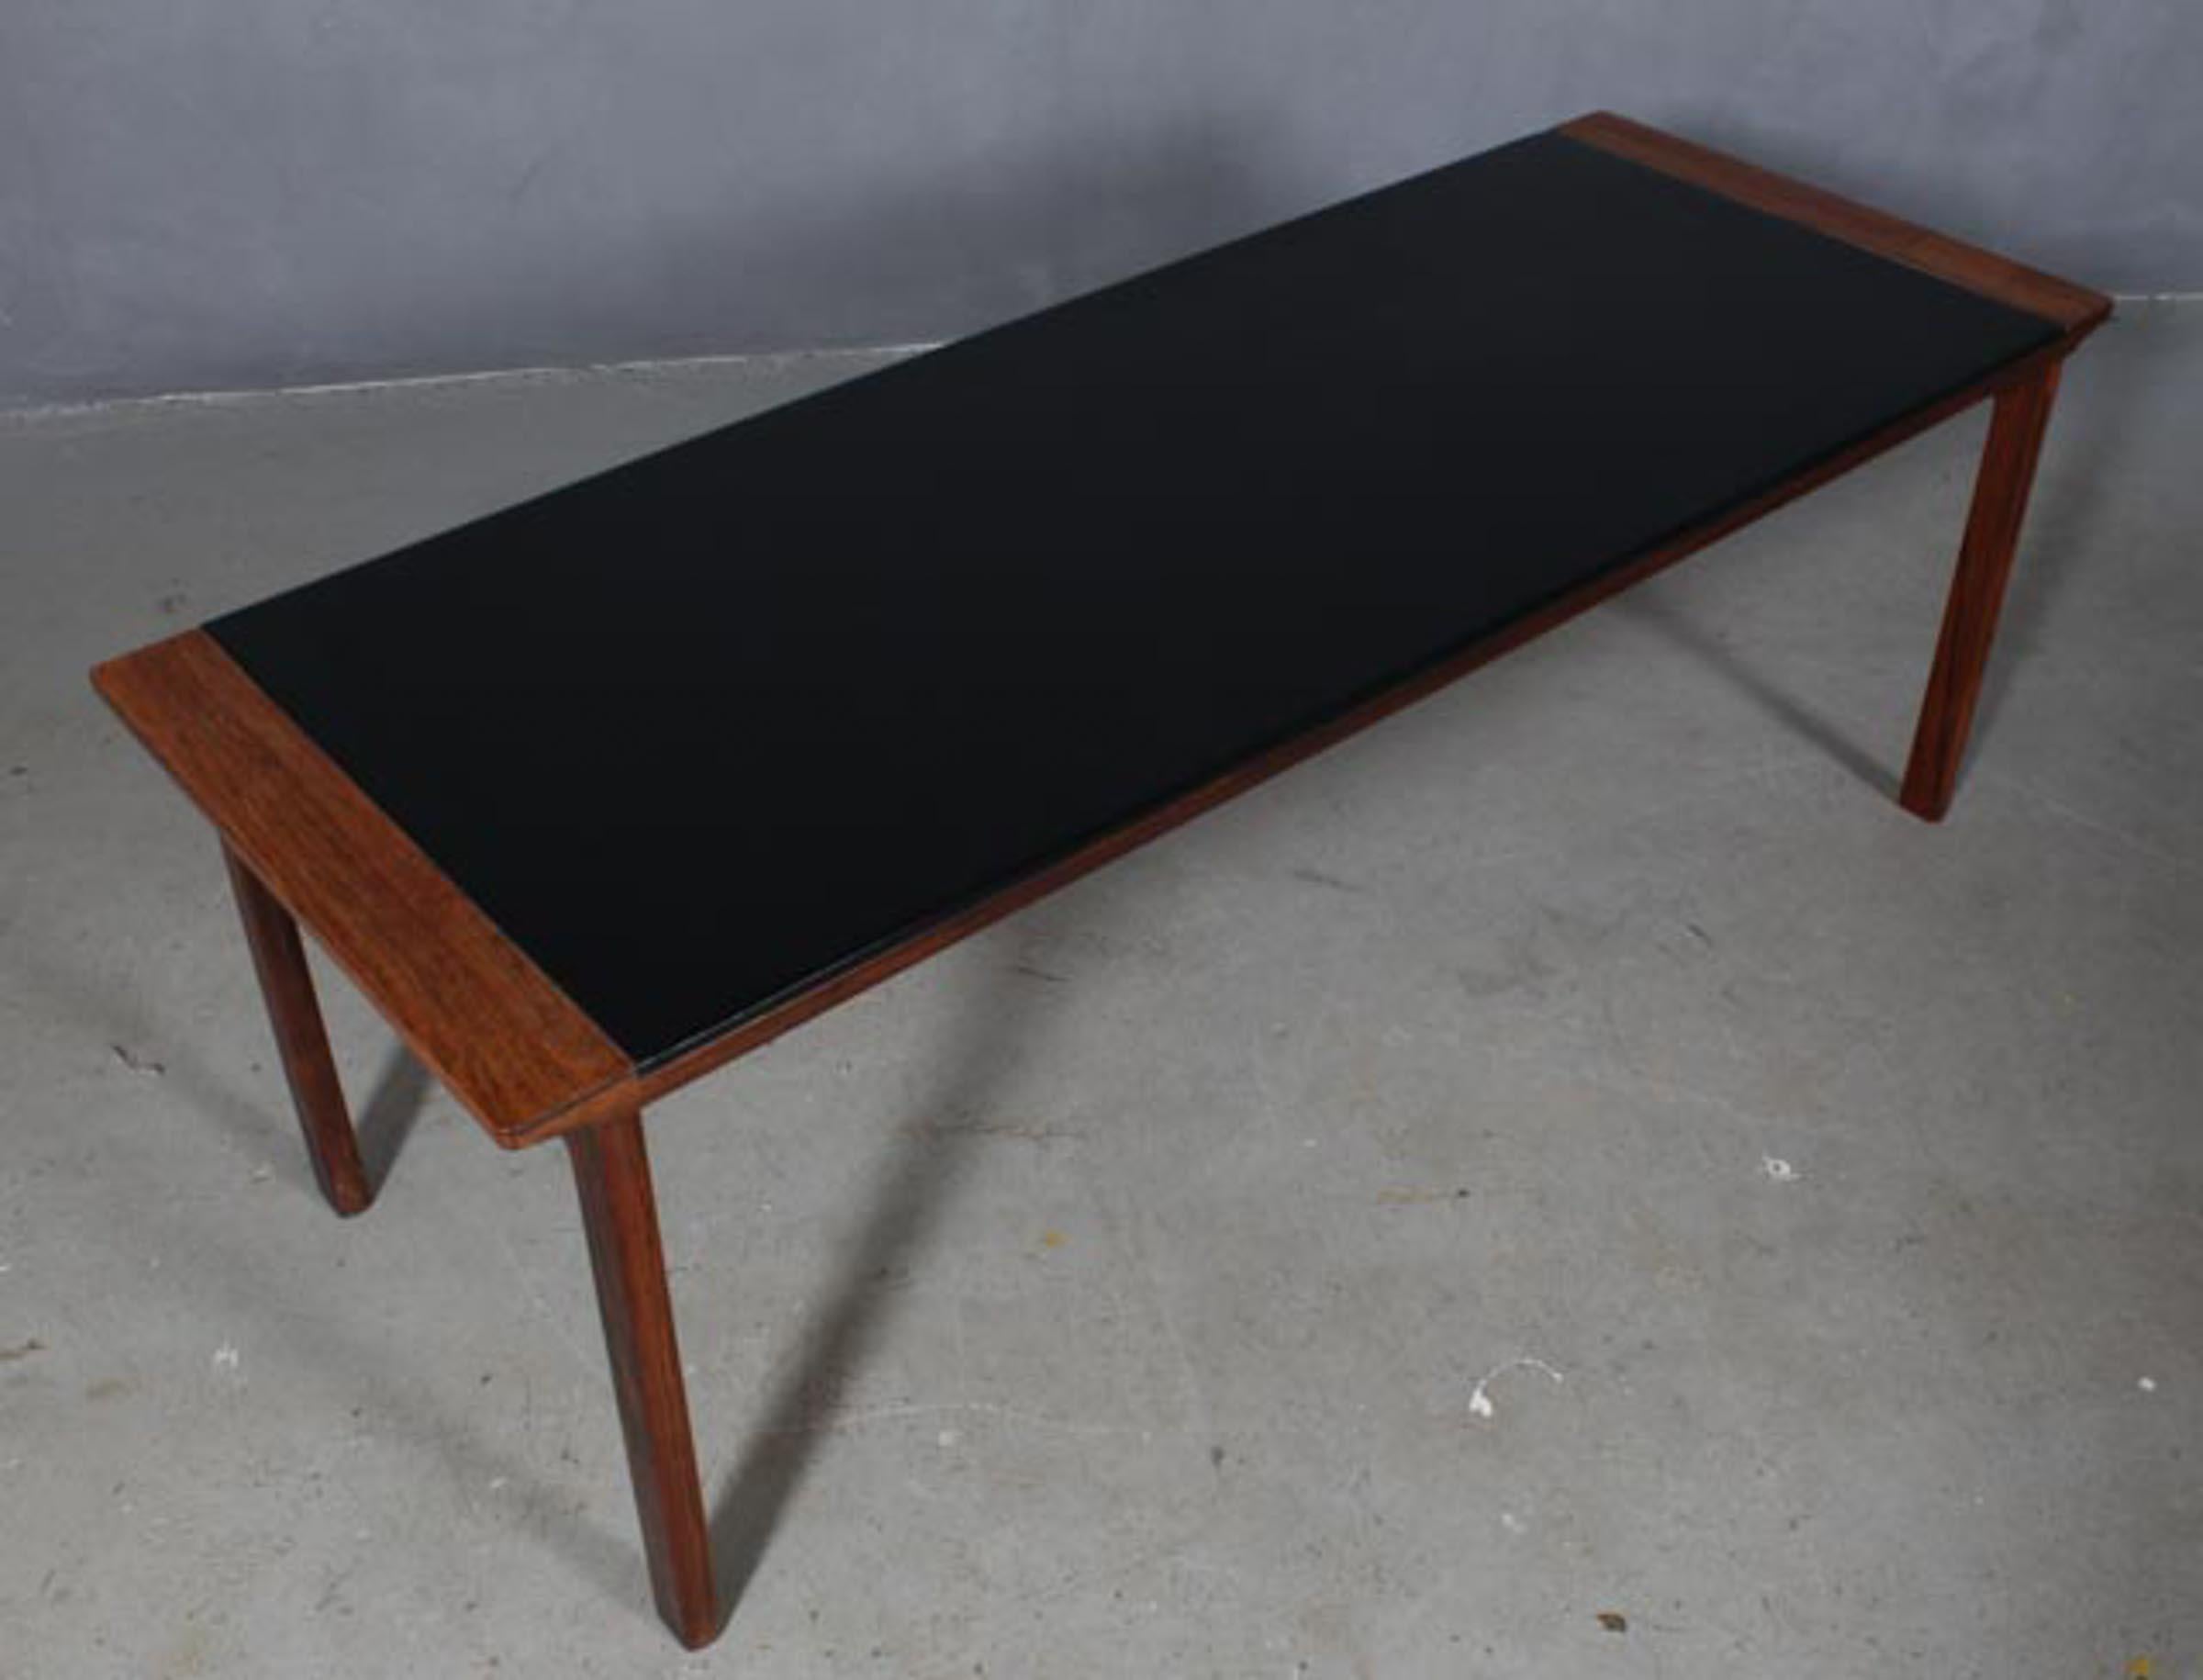 Hans Olsen coffee table / side table of rosewood and leather.